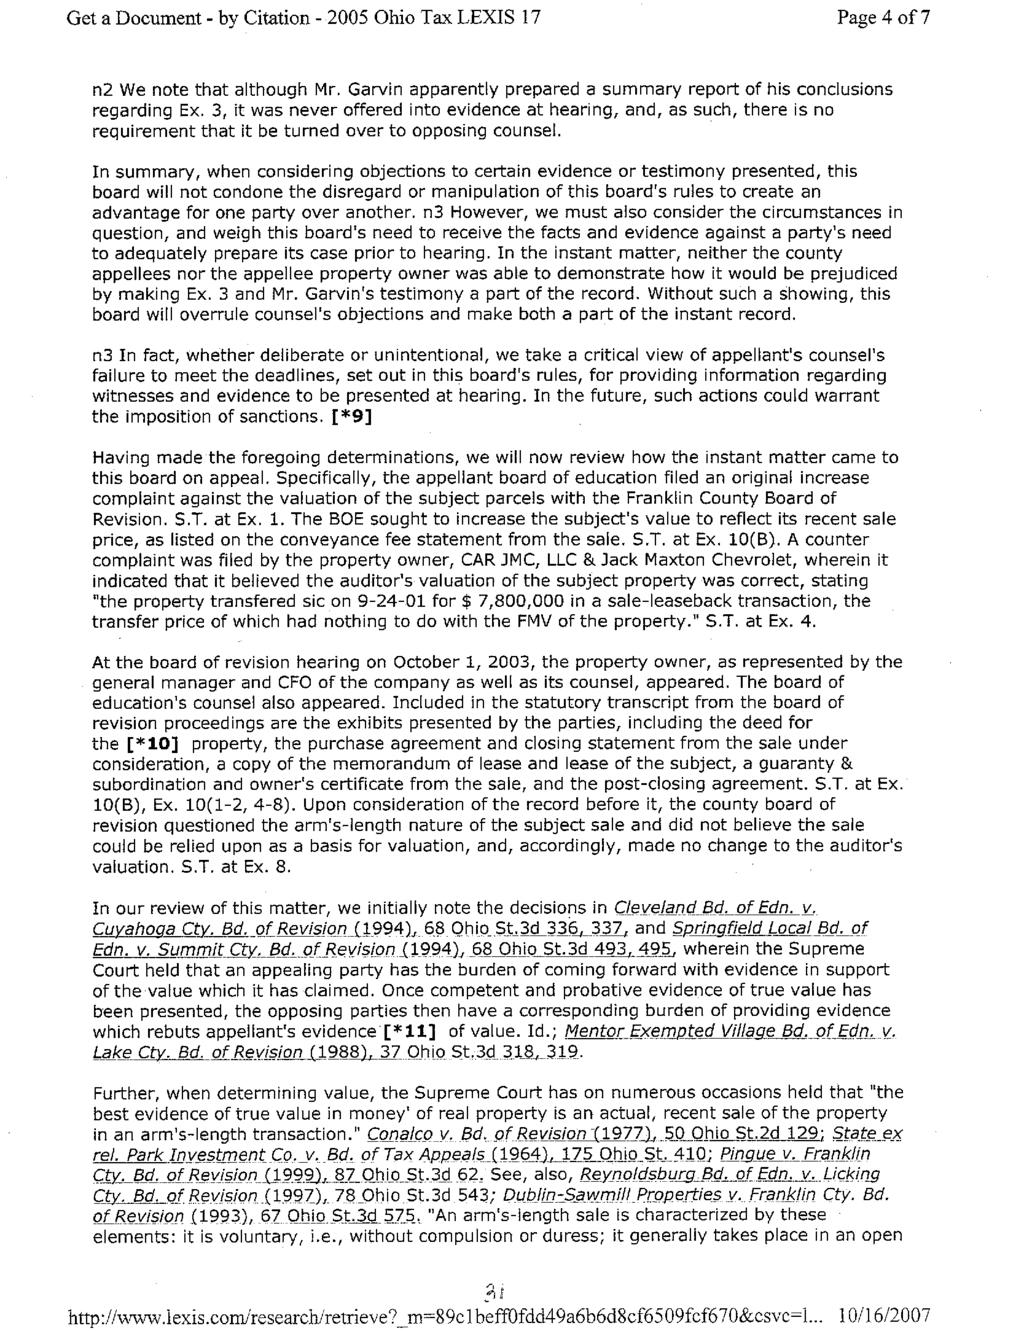 Get a Document - by Citation - 2005 Ohio Tax LEXIS 17 Page 4 of 7 n2 We note that although Mr. Garvin apparently prepared a summary report of his conclusions regarding Ex.